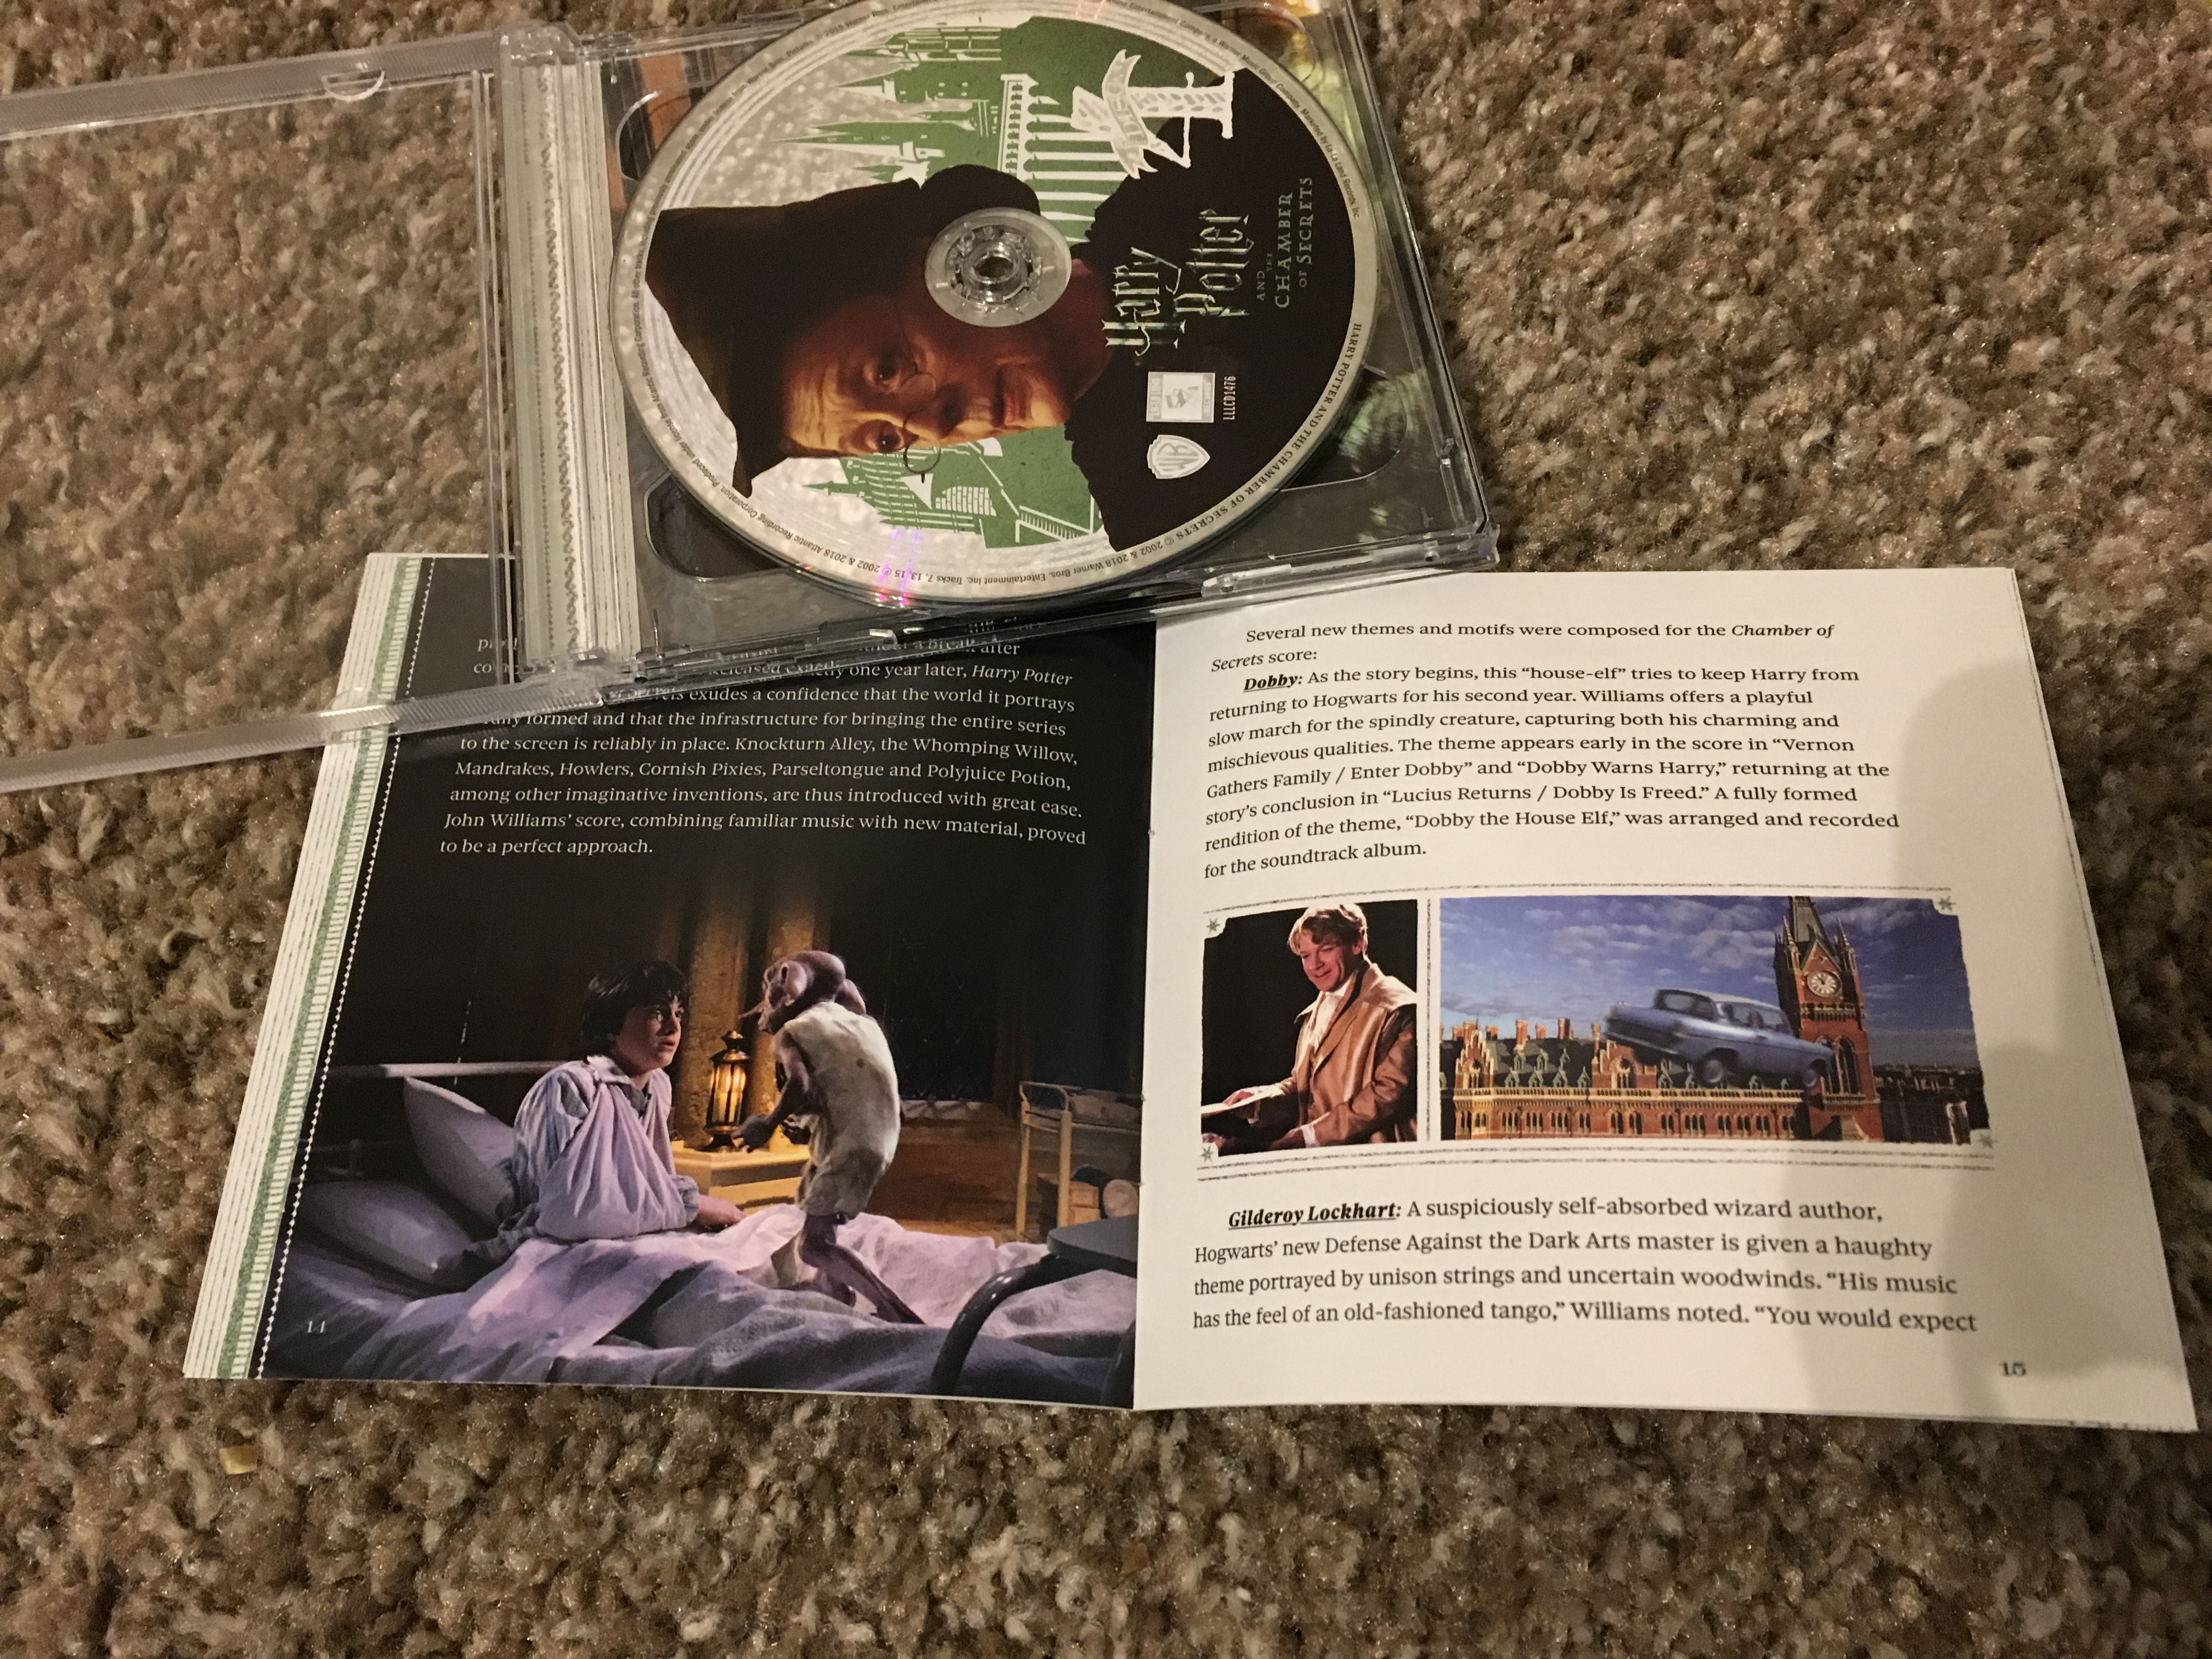 “Harry Potter: The John Williams Soundtrack Collection”, Disc 4, “Chamber of Secrets” score with liner notes